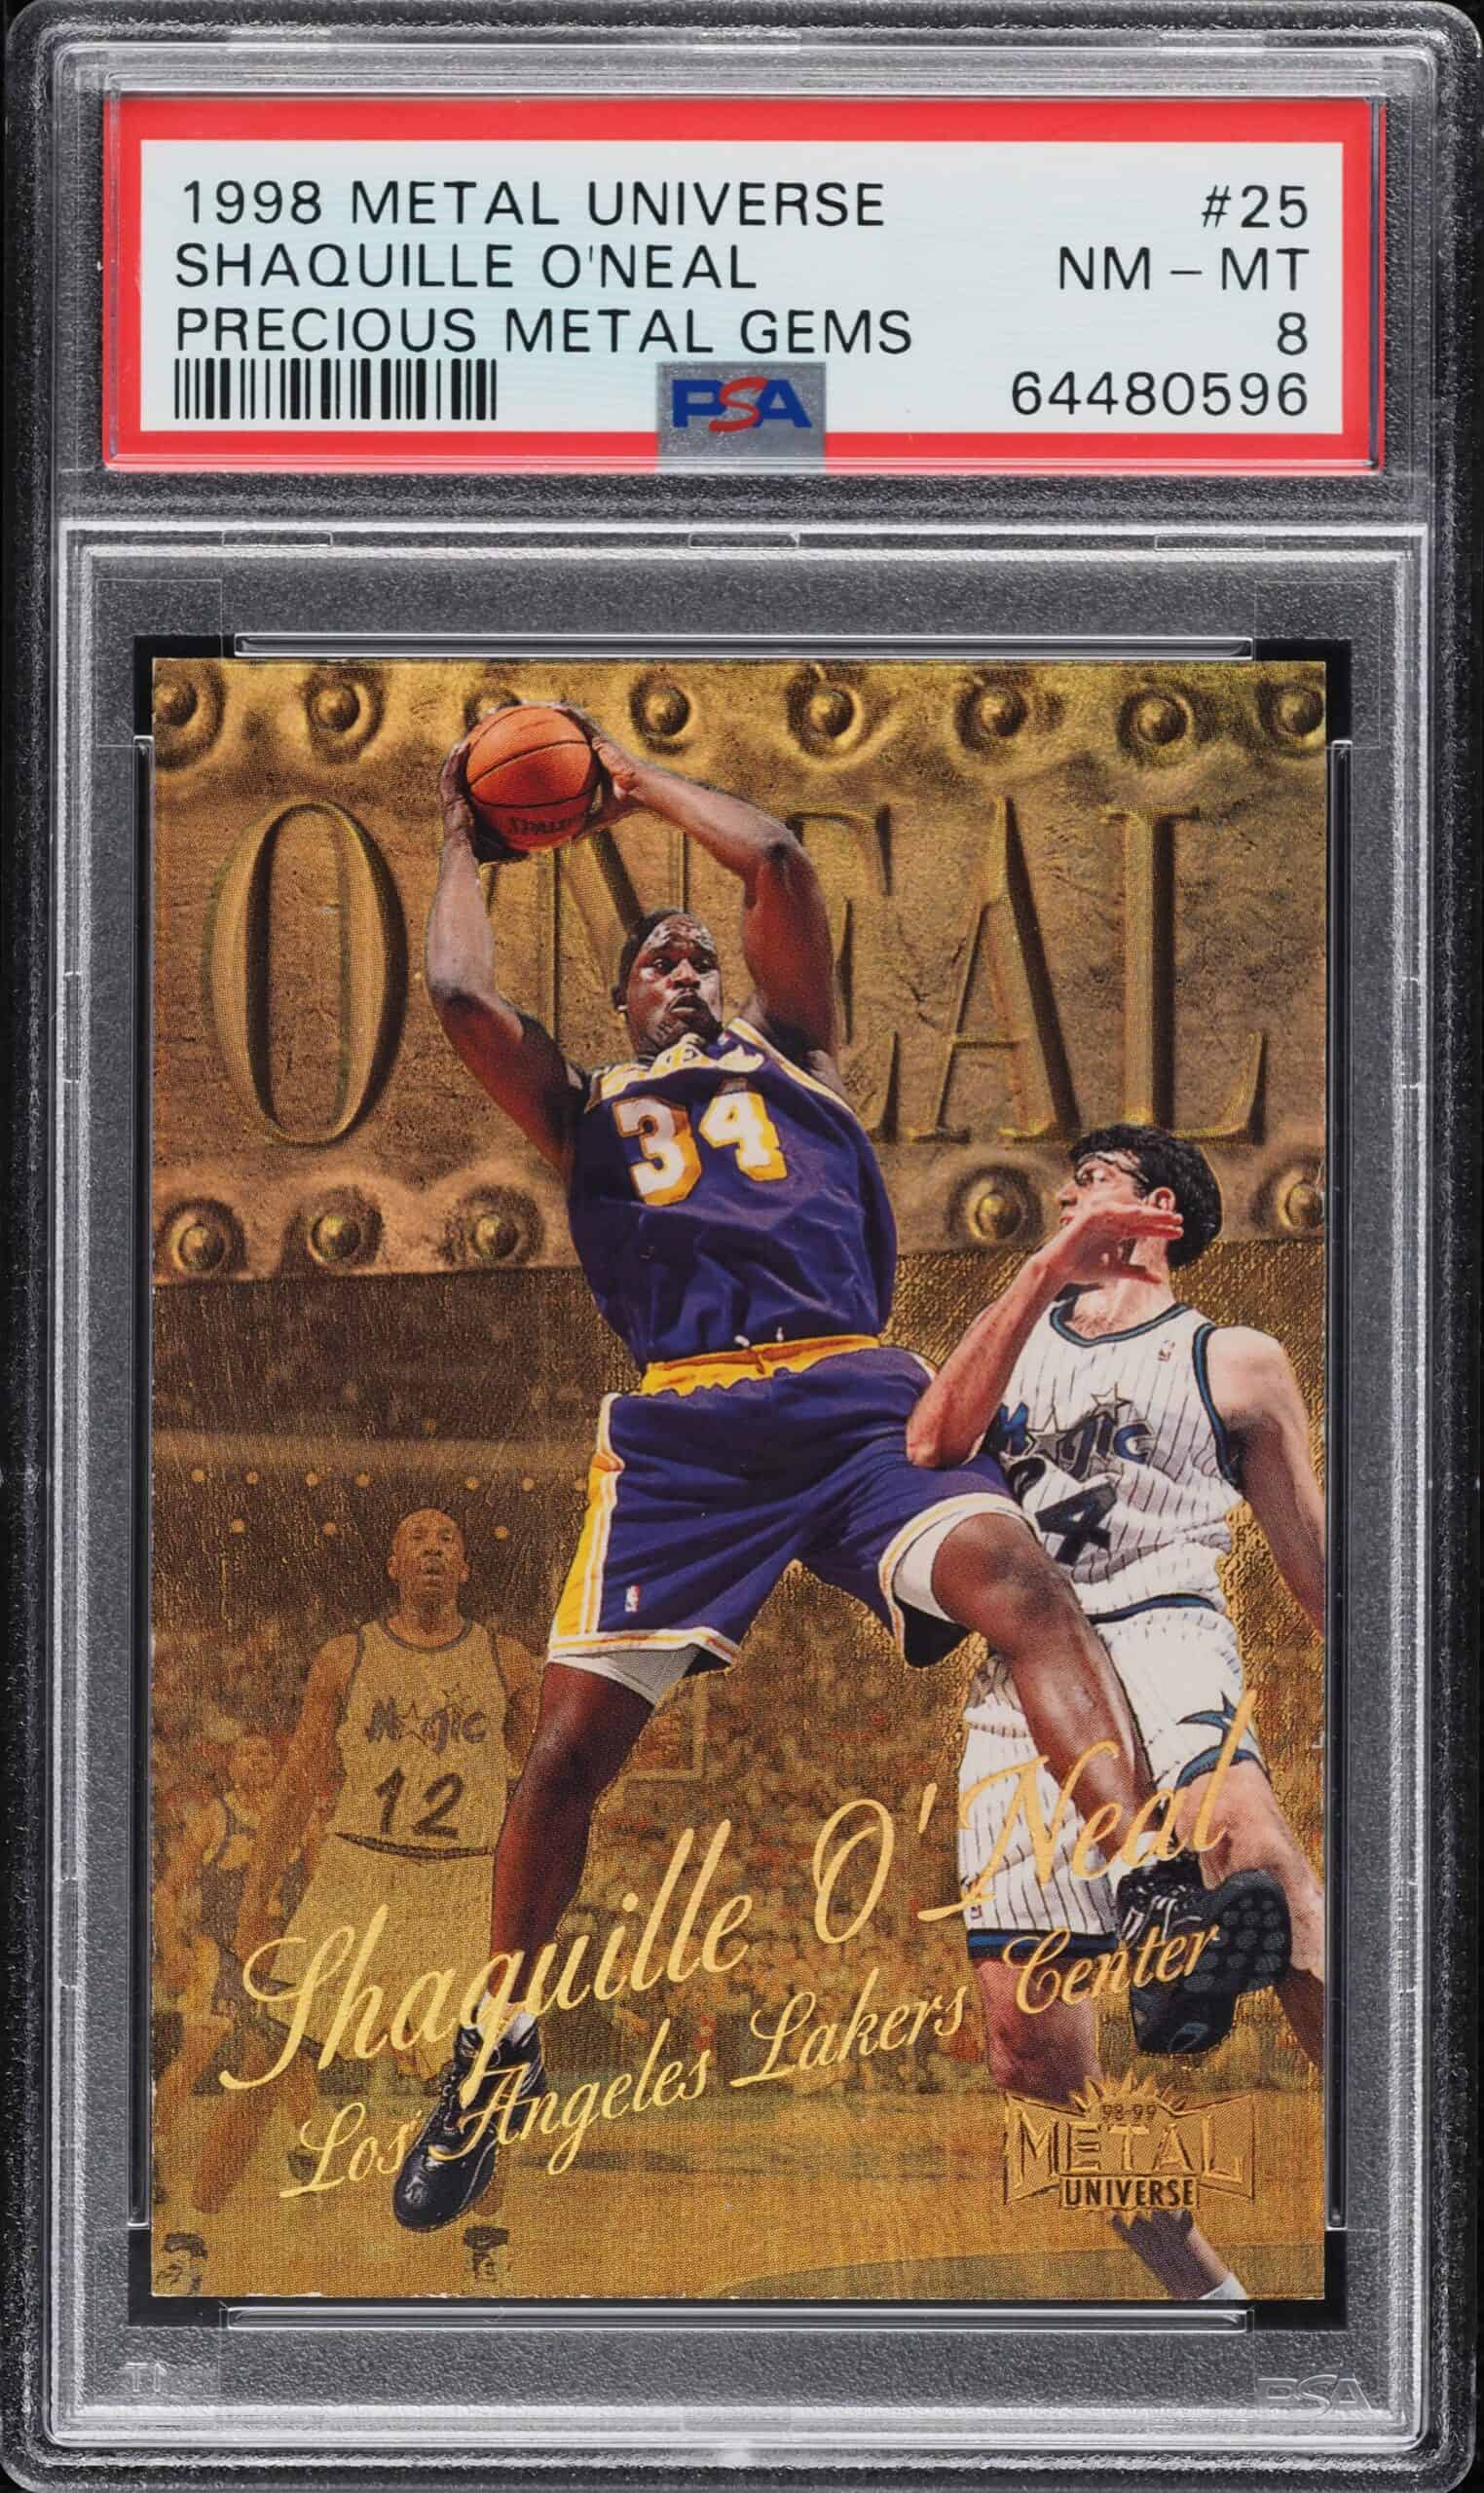 Shaquille O’Neal 1998-99 Metal Universe PMG